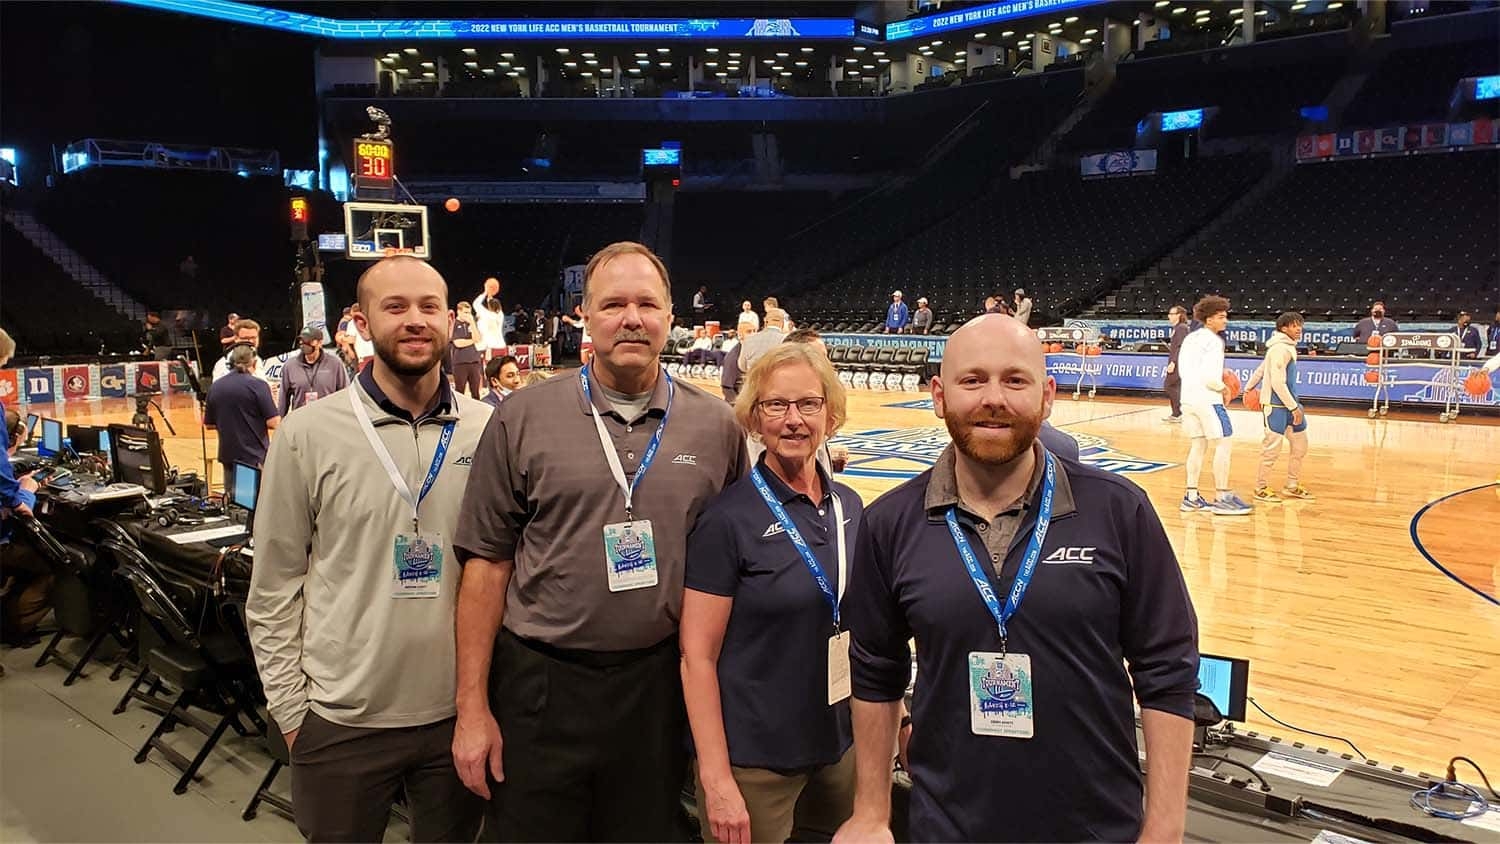 The Kivett family on the sidelines at the 2022 ACC tournament